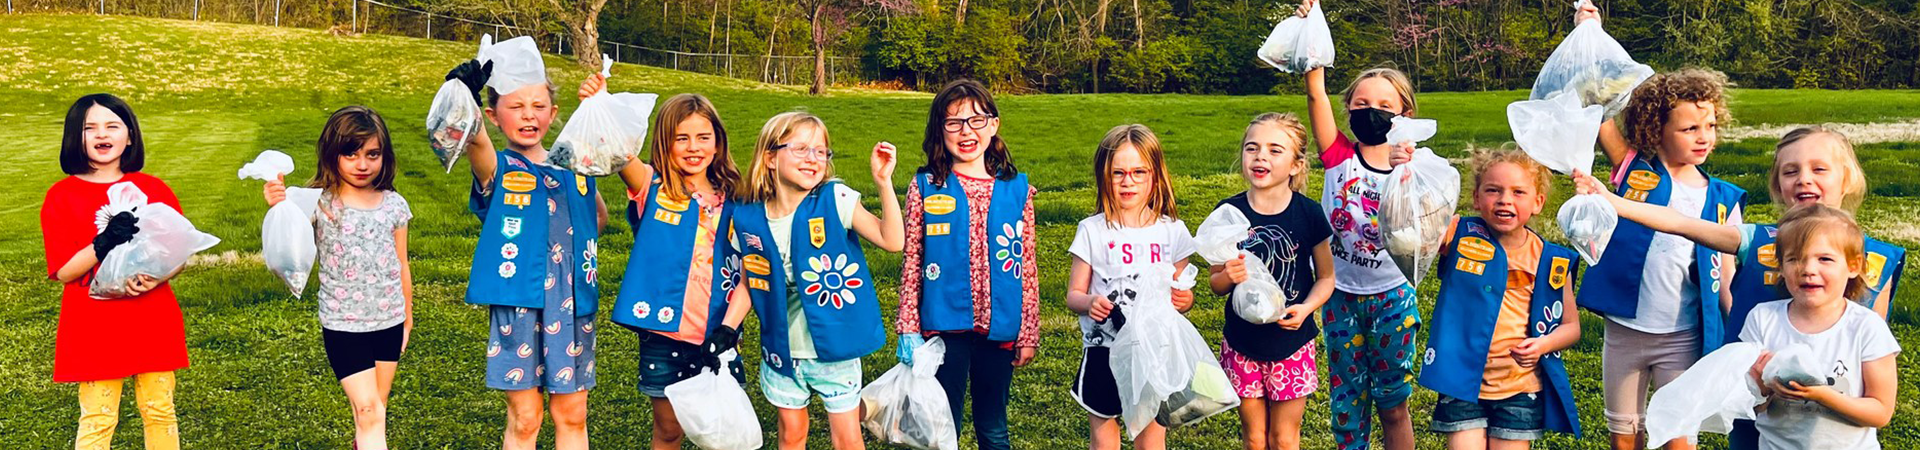  girl scout daisies posing with trash bags full of trash they cleaned up from a park 